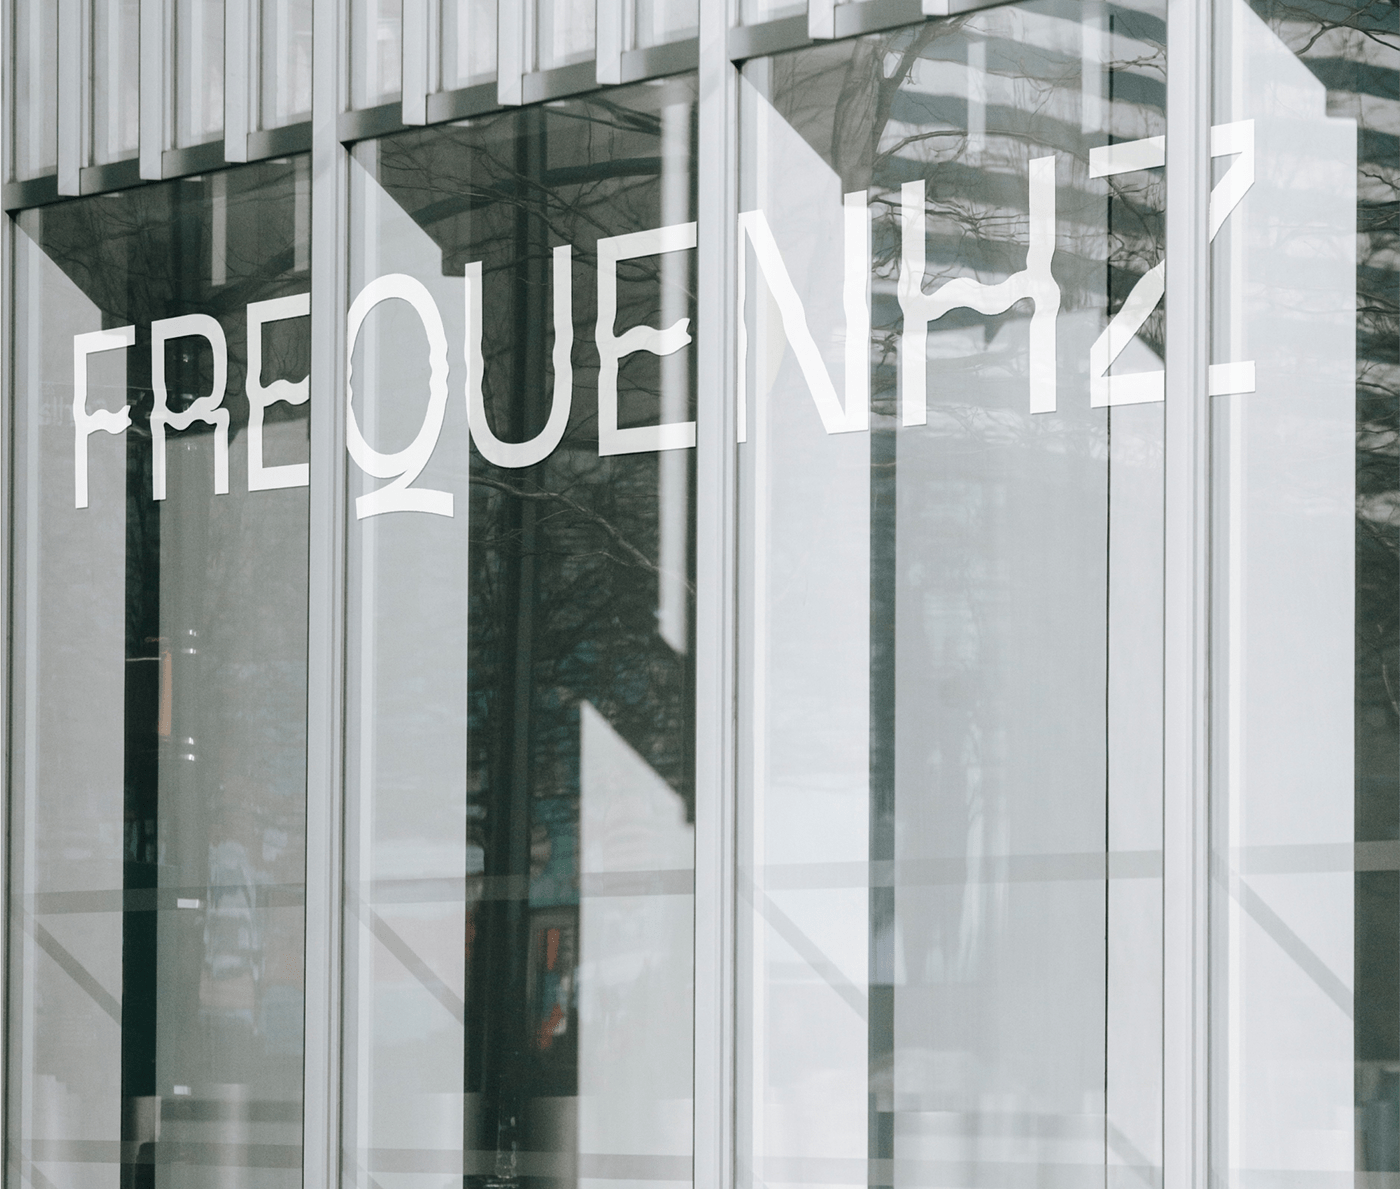 frequenhz logotype in the glass of studio front